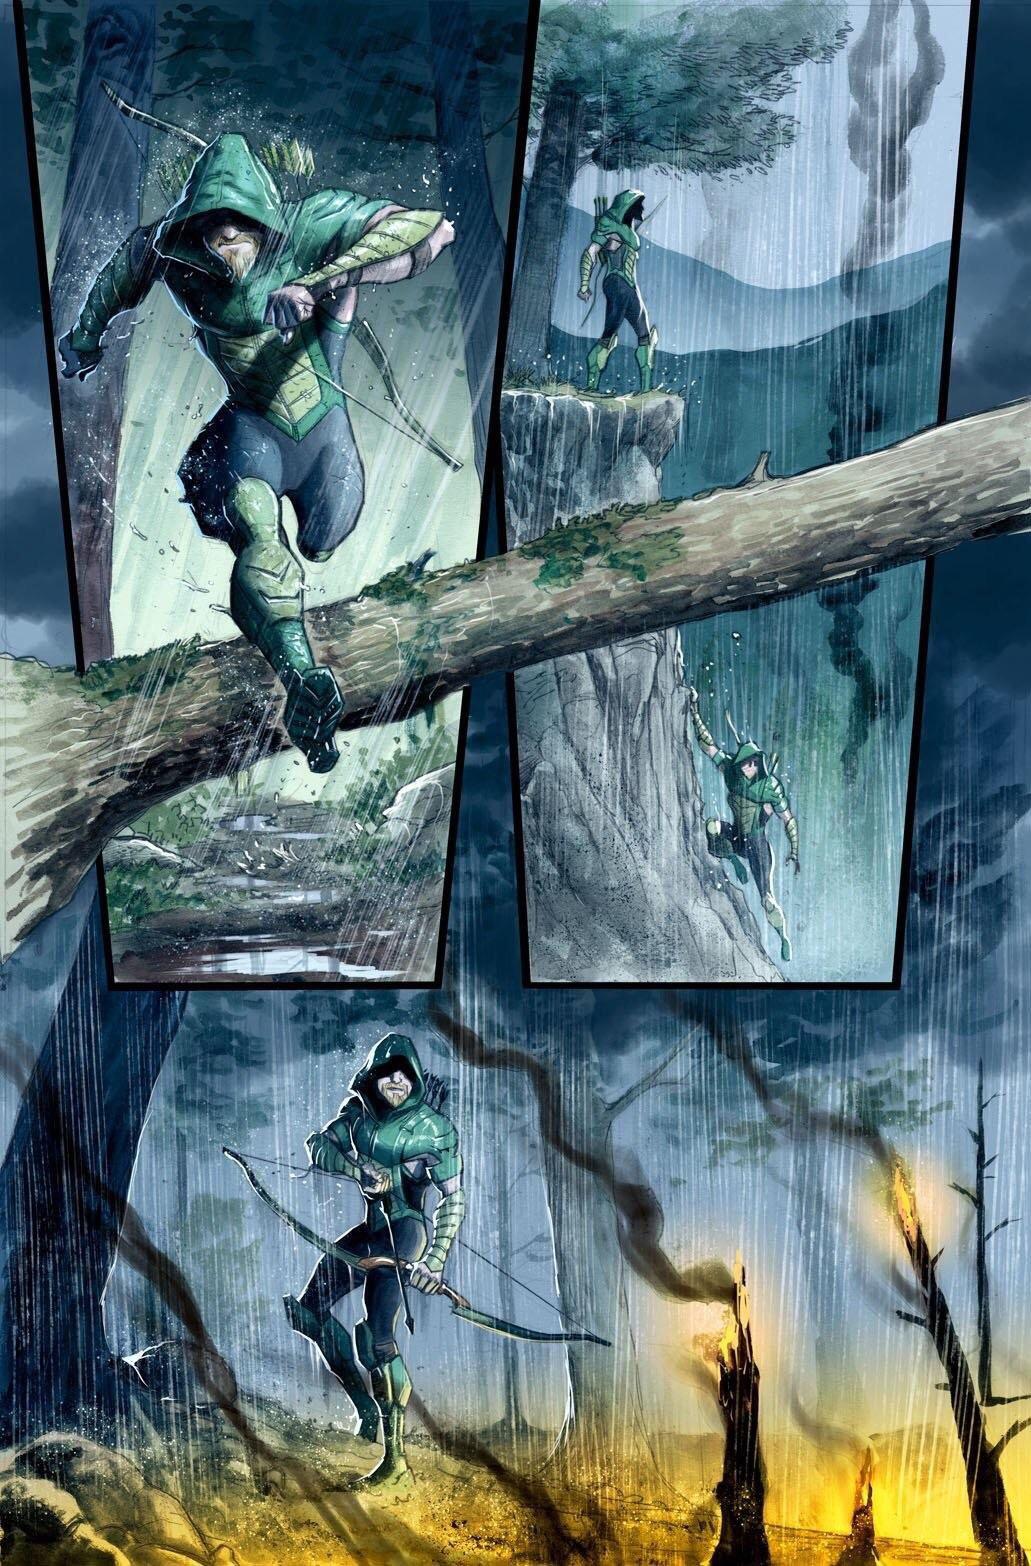 Awesome Green Arrow art! Cool phone wallpaper